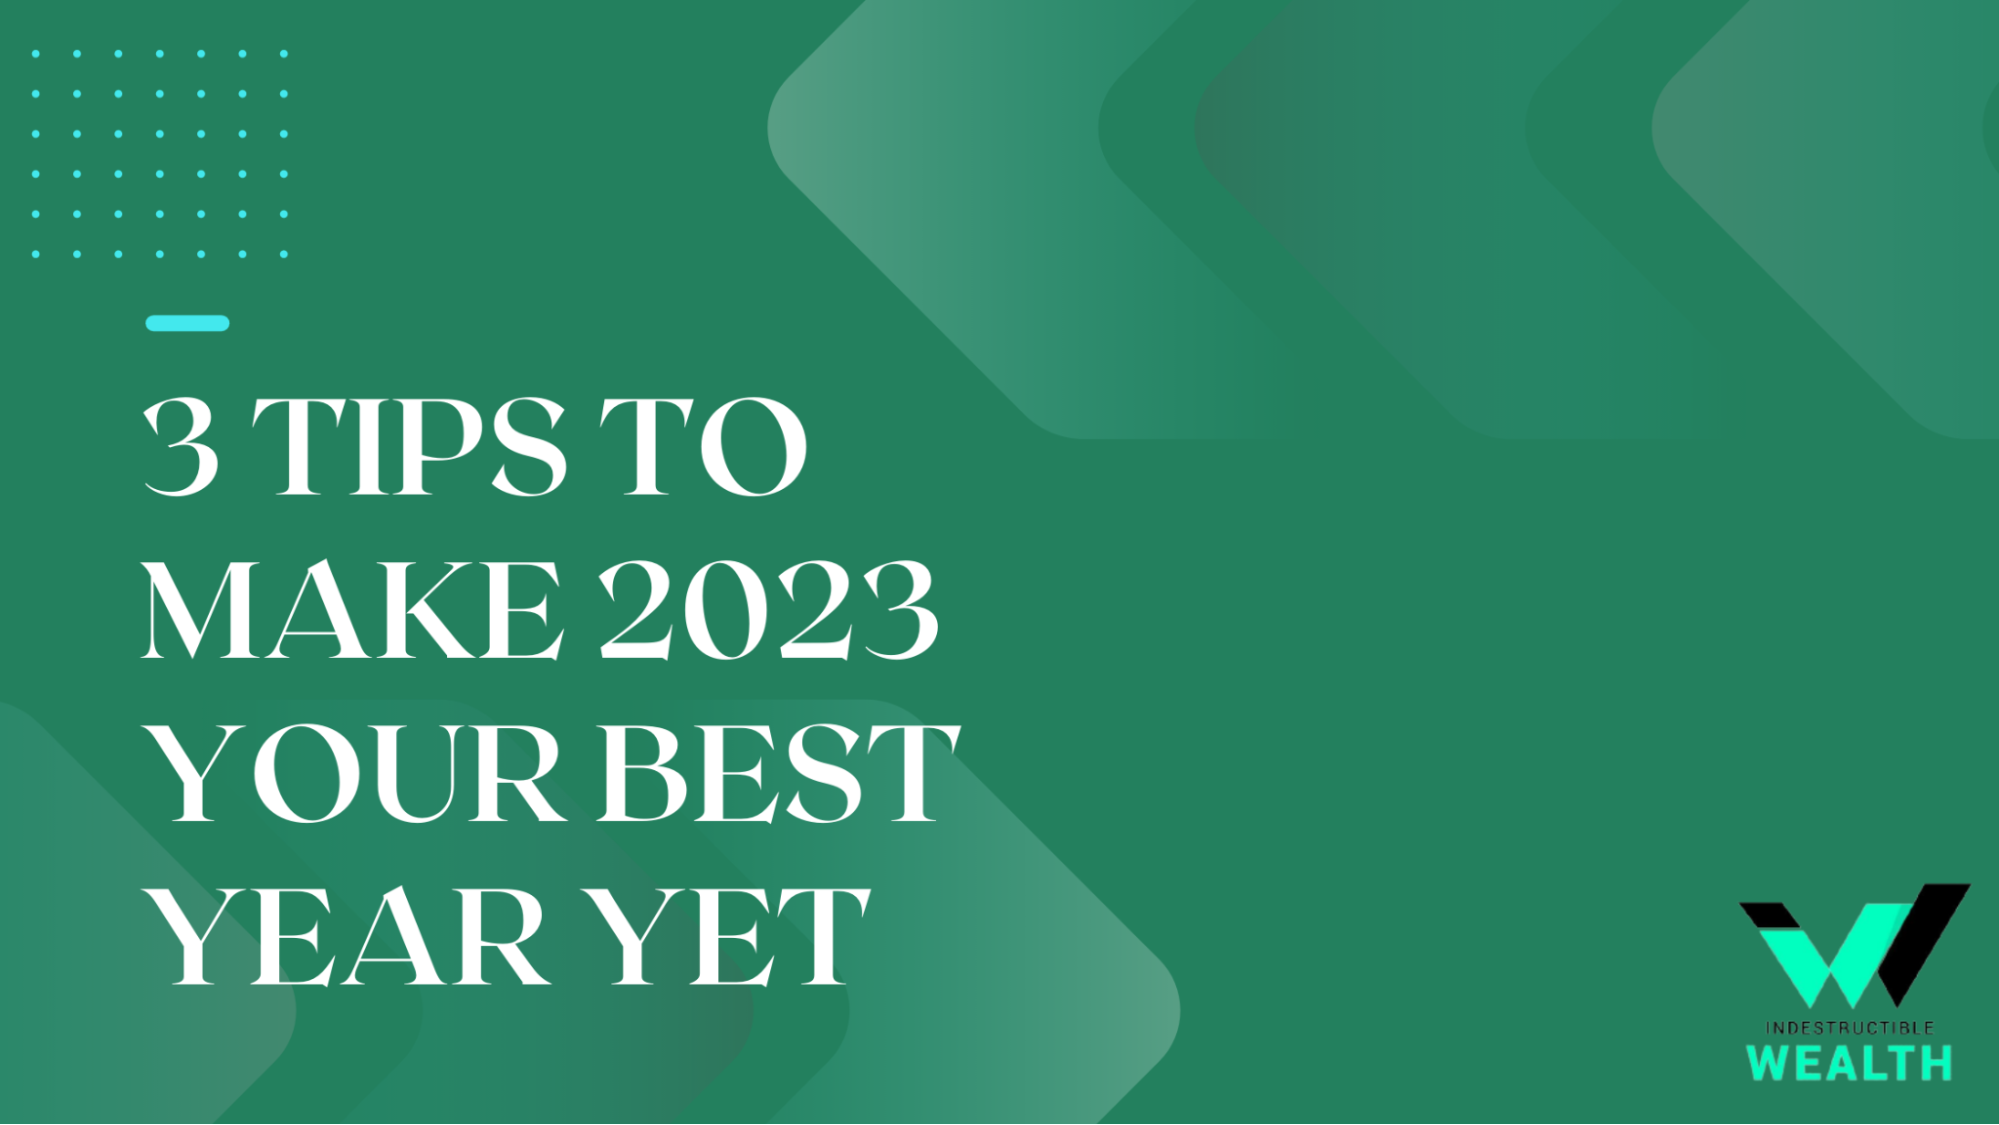 3 Tips To Make 2023 Your Best Year Yet